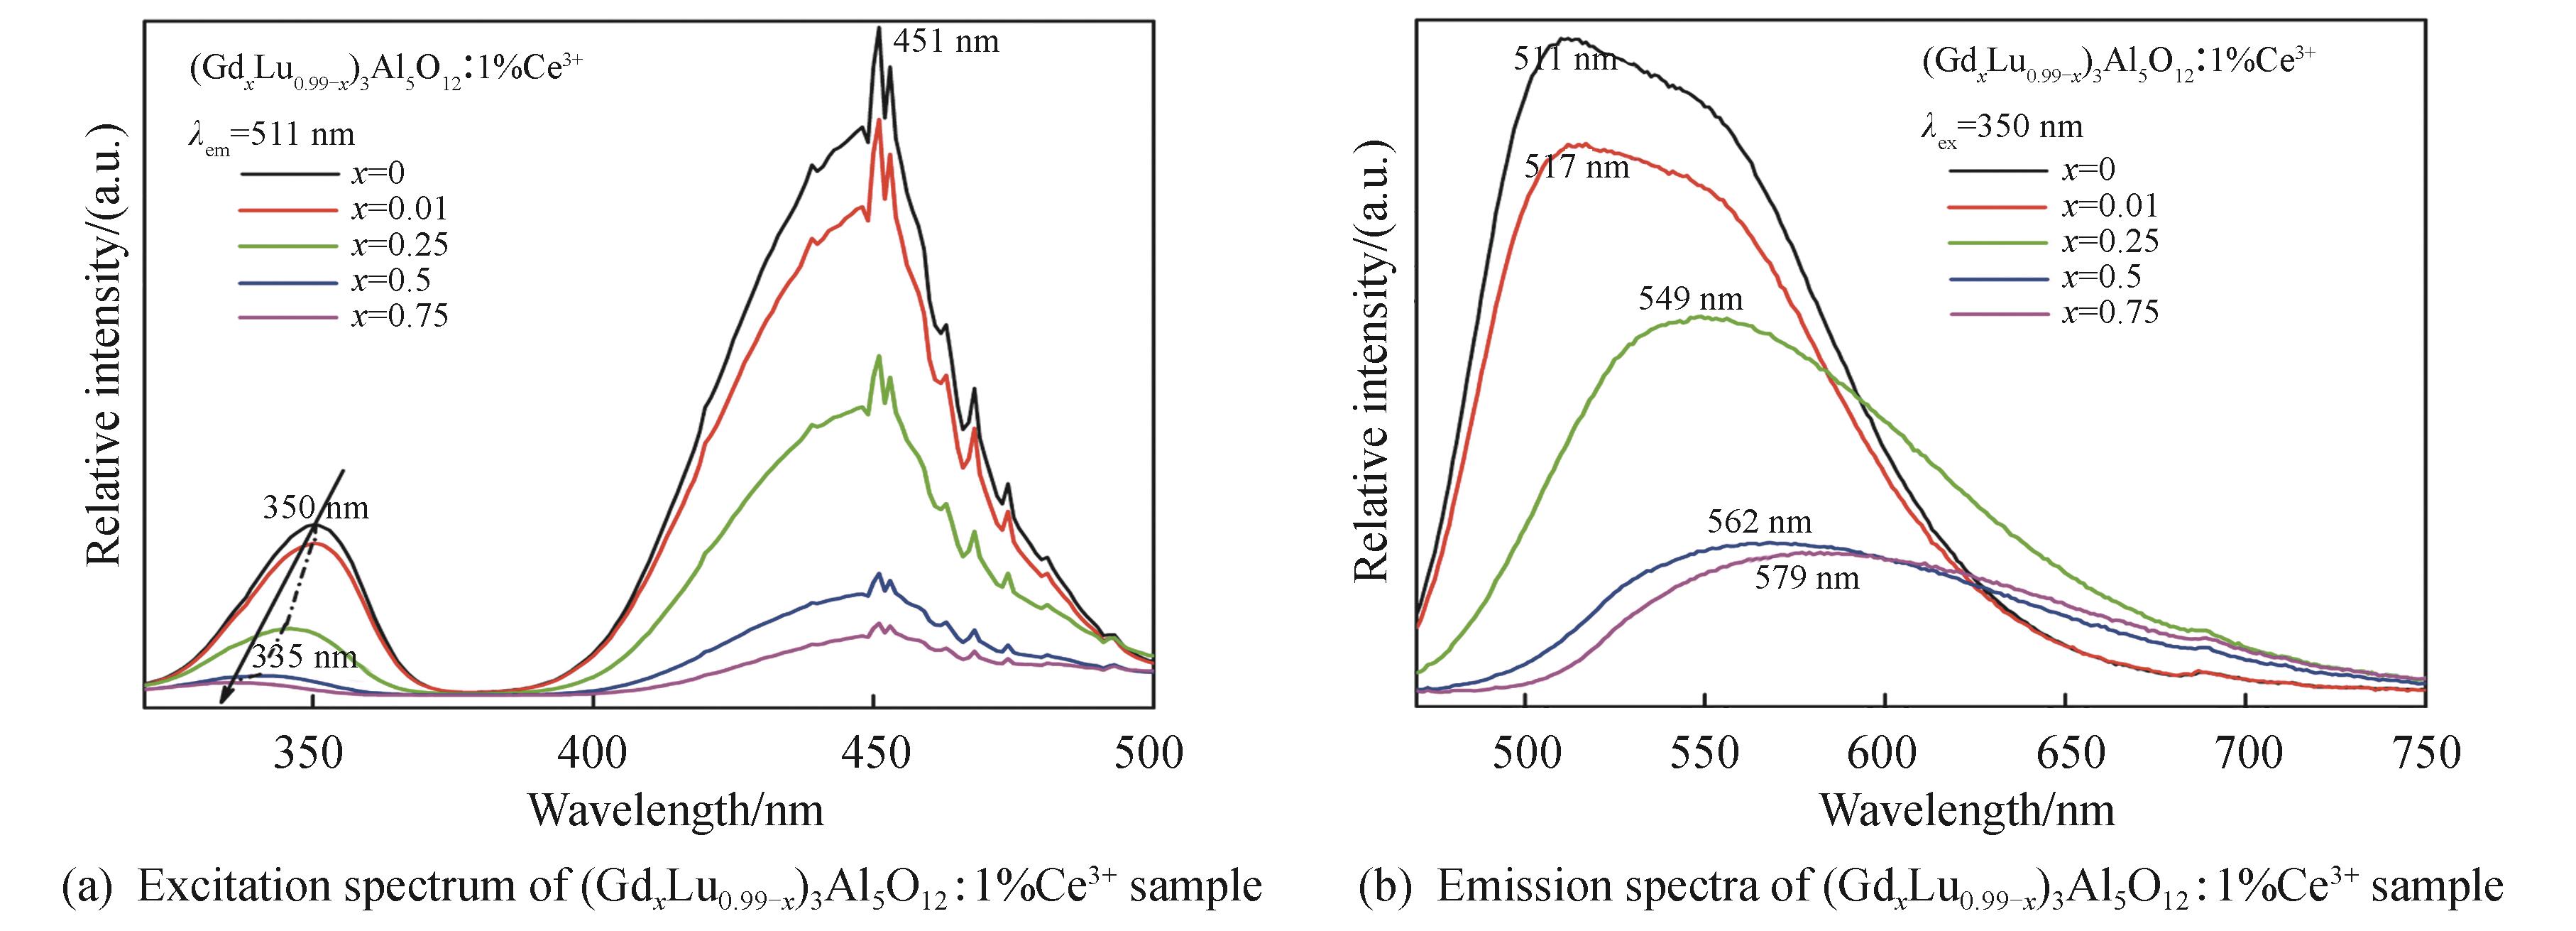 Excitation and emission spectra of Lu2.97Al5O12：1%Ce3+sample doped with different concentrations of Gd3+